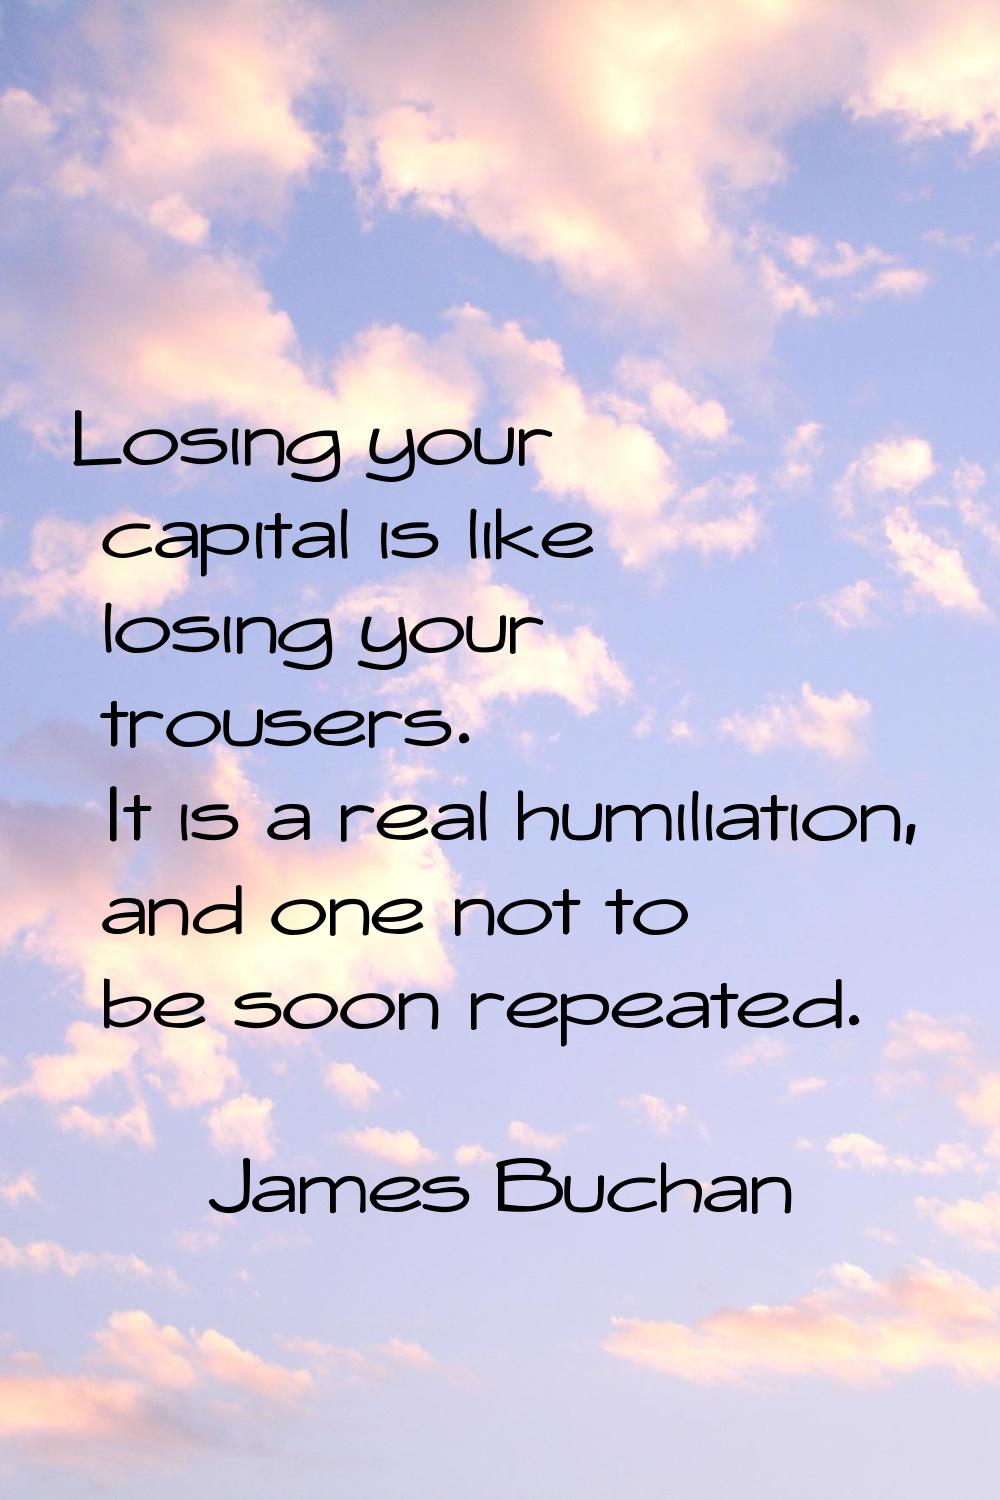 Losing your capital is like losing your trousers. It is a real humiliation, and one not to be soon 